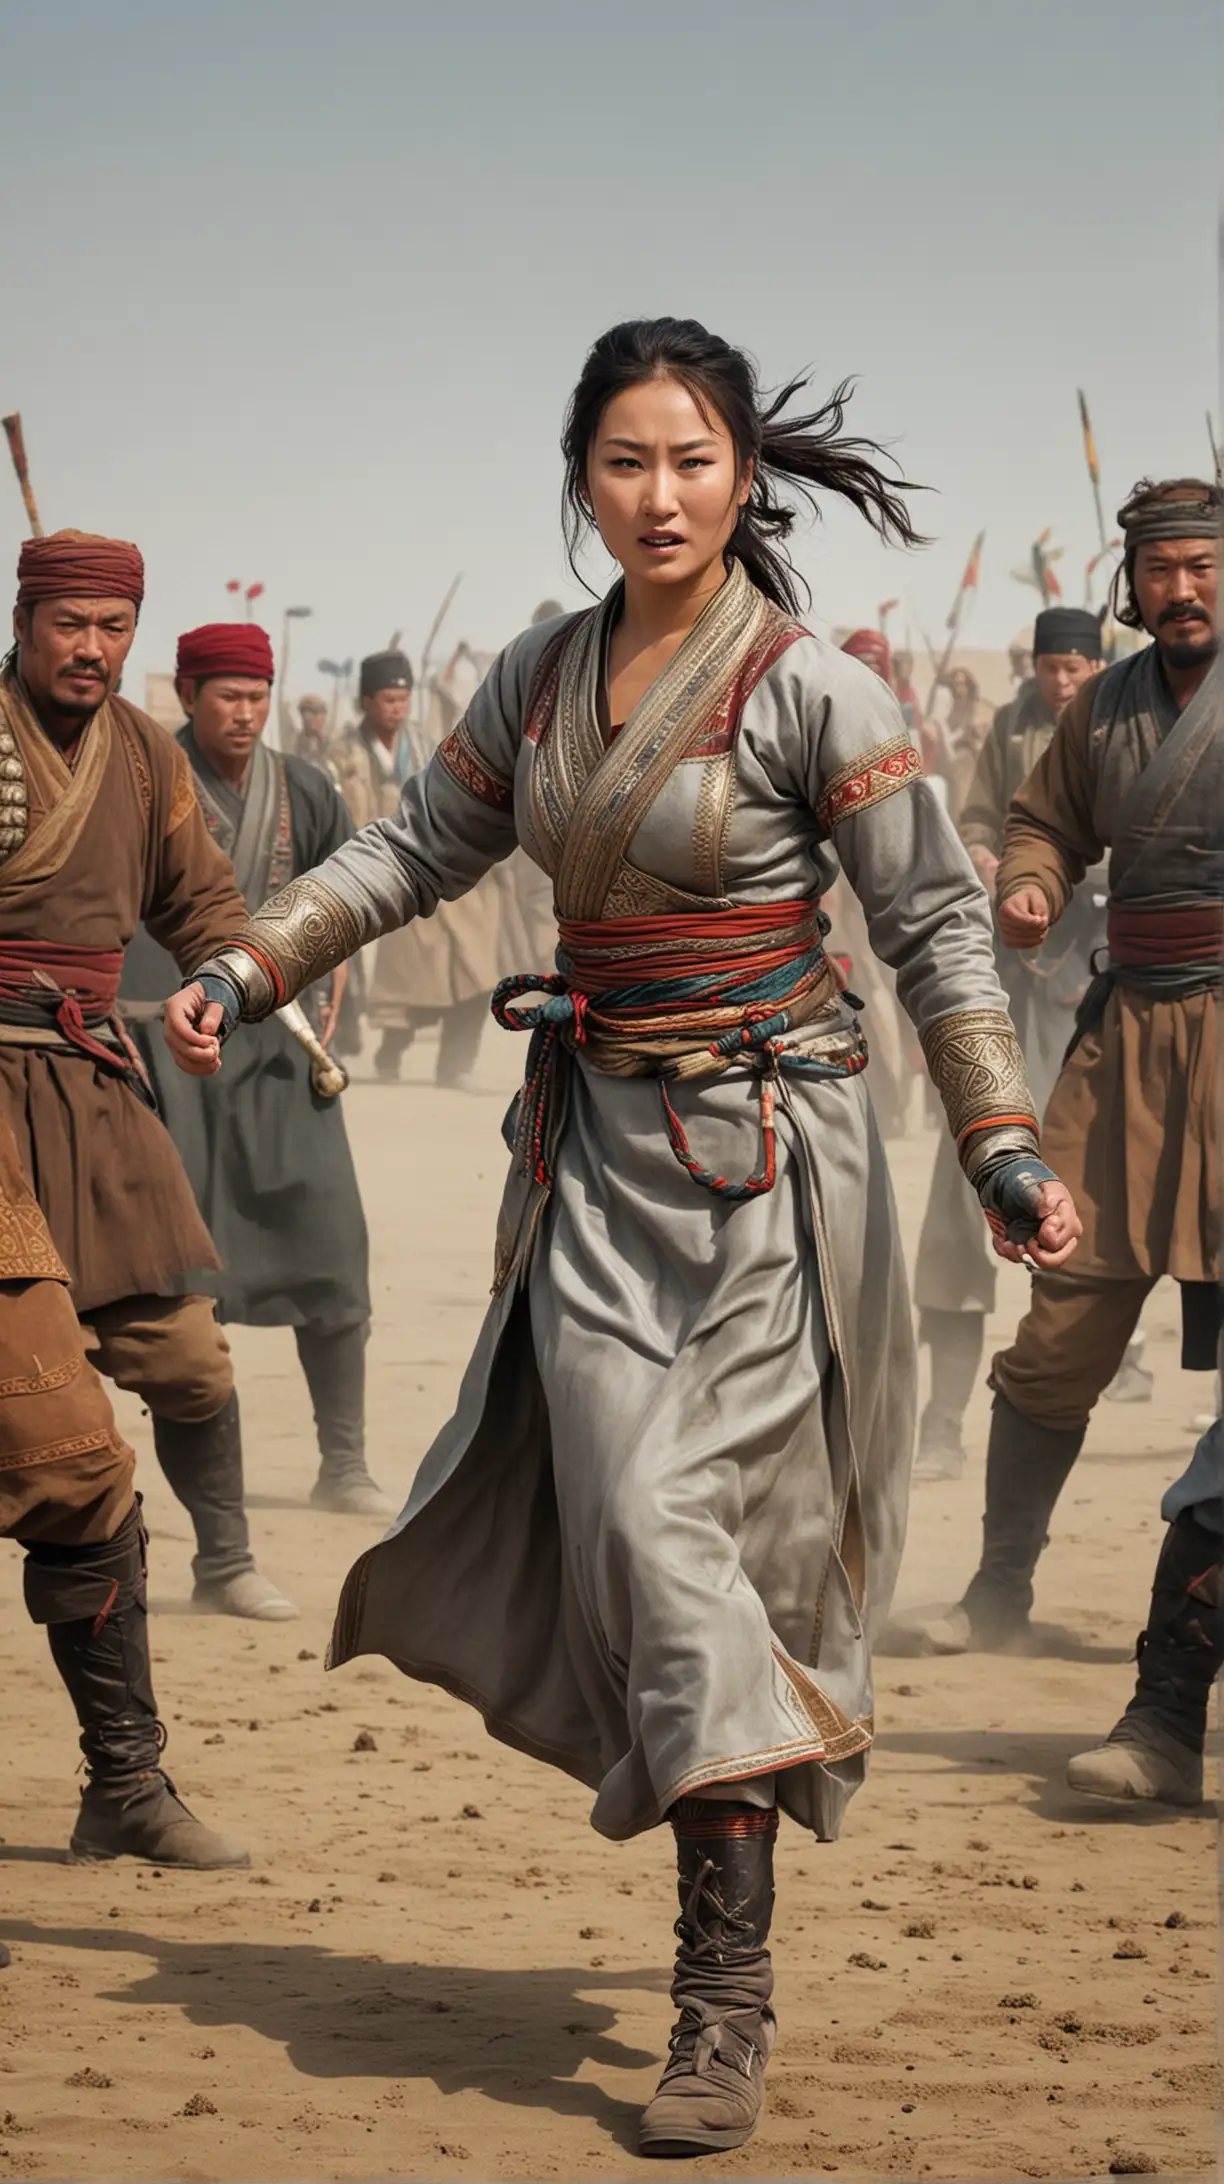 Kutlun Granddaughter of Genghis Khan Wrestles Suitors with Confidence